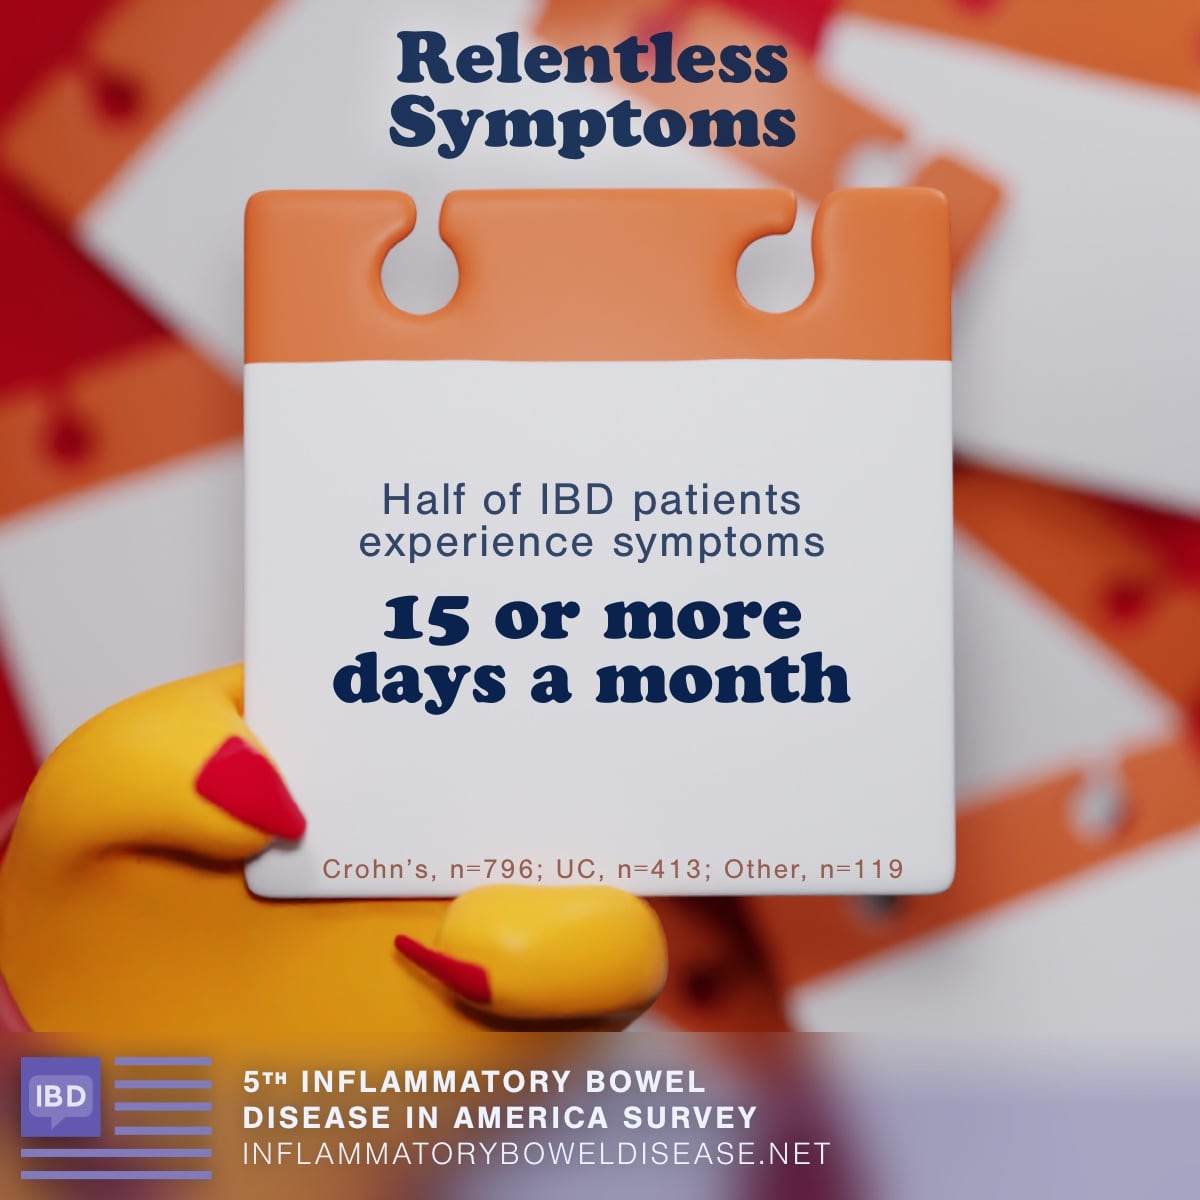 Relentless symptoms. Half of IBD patients experience symptoms 15 or more days a month.